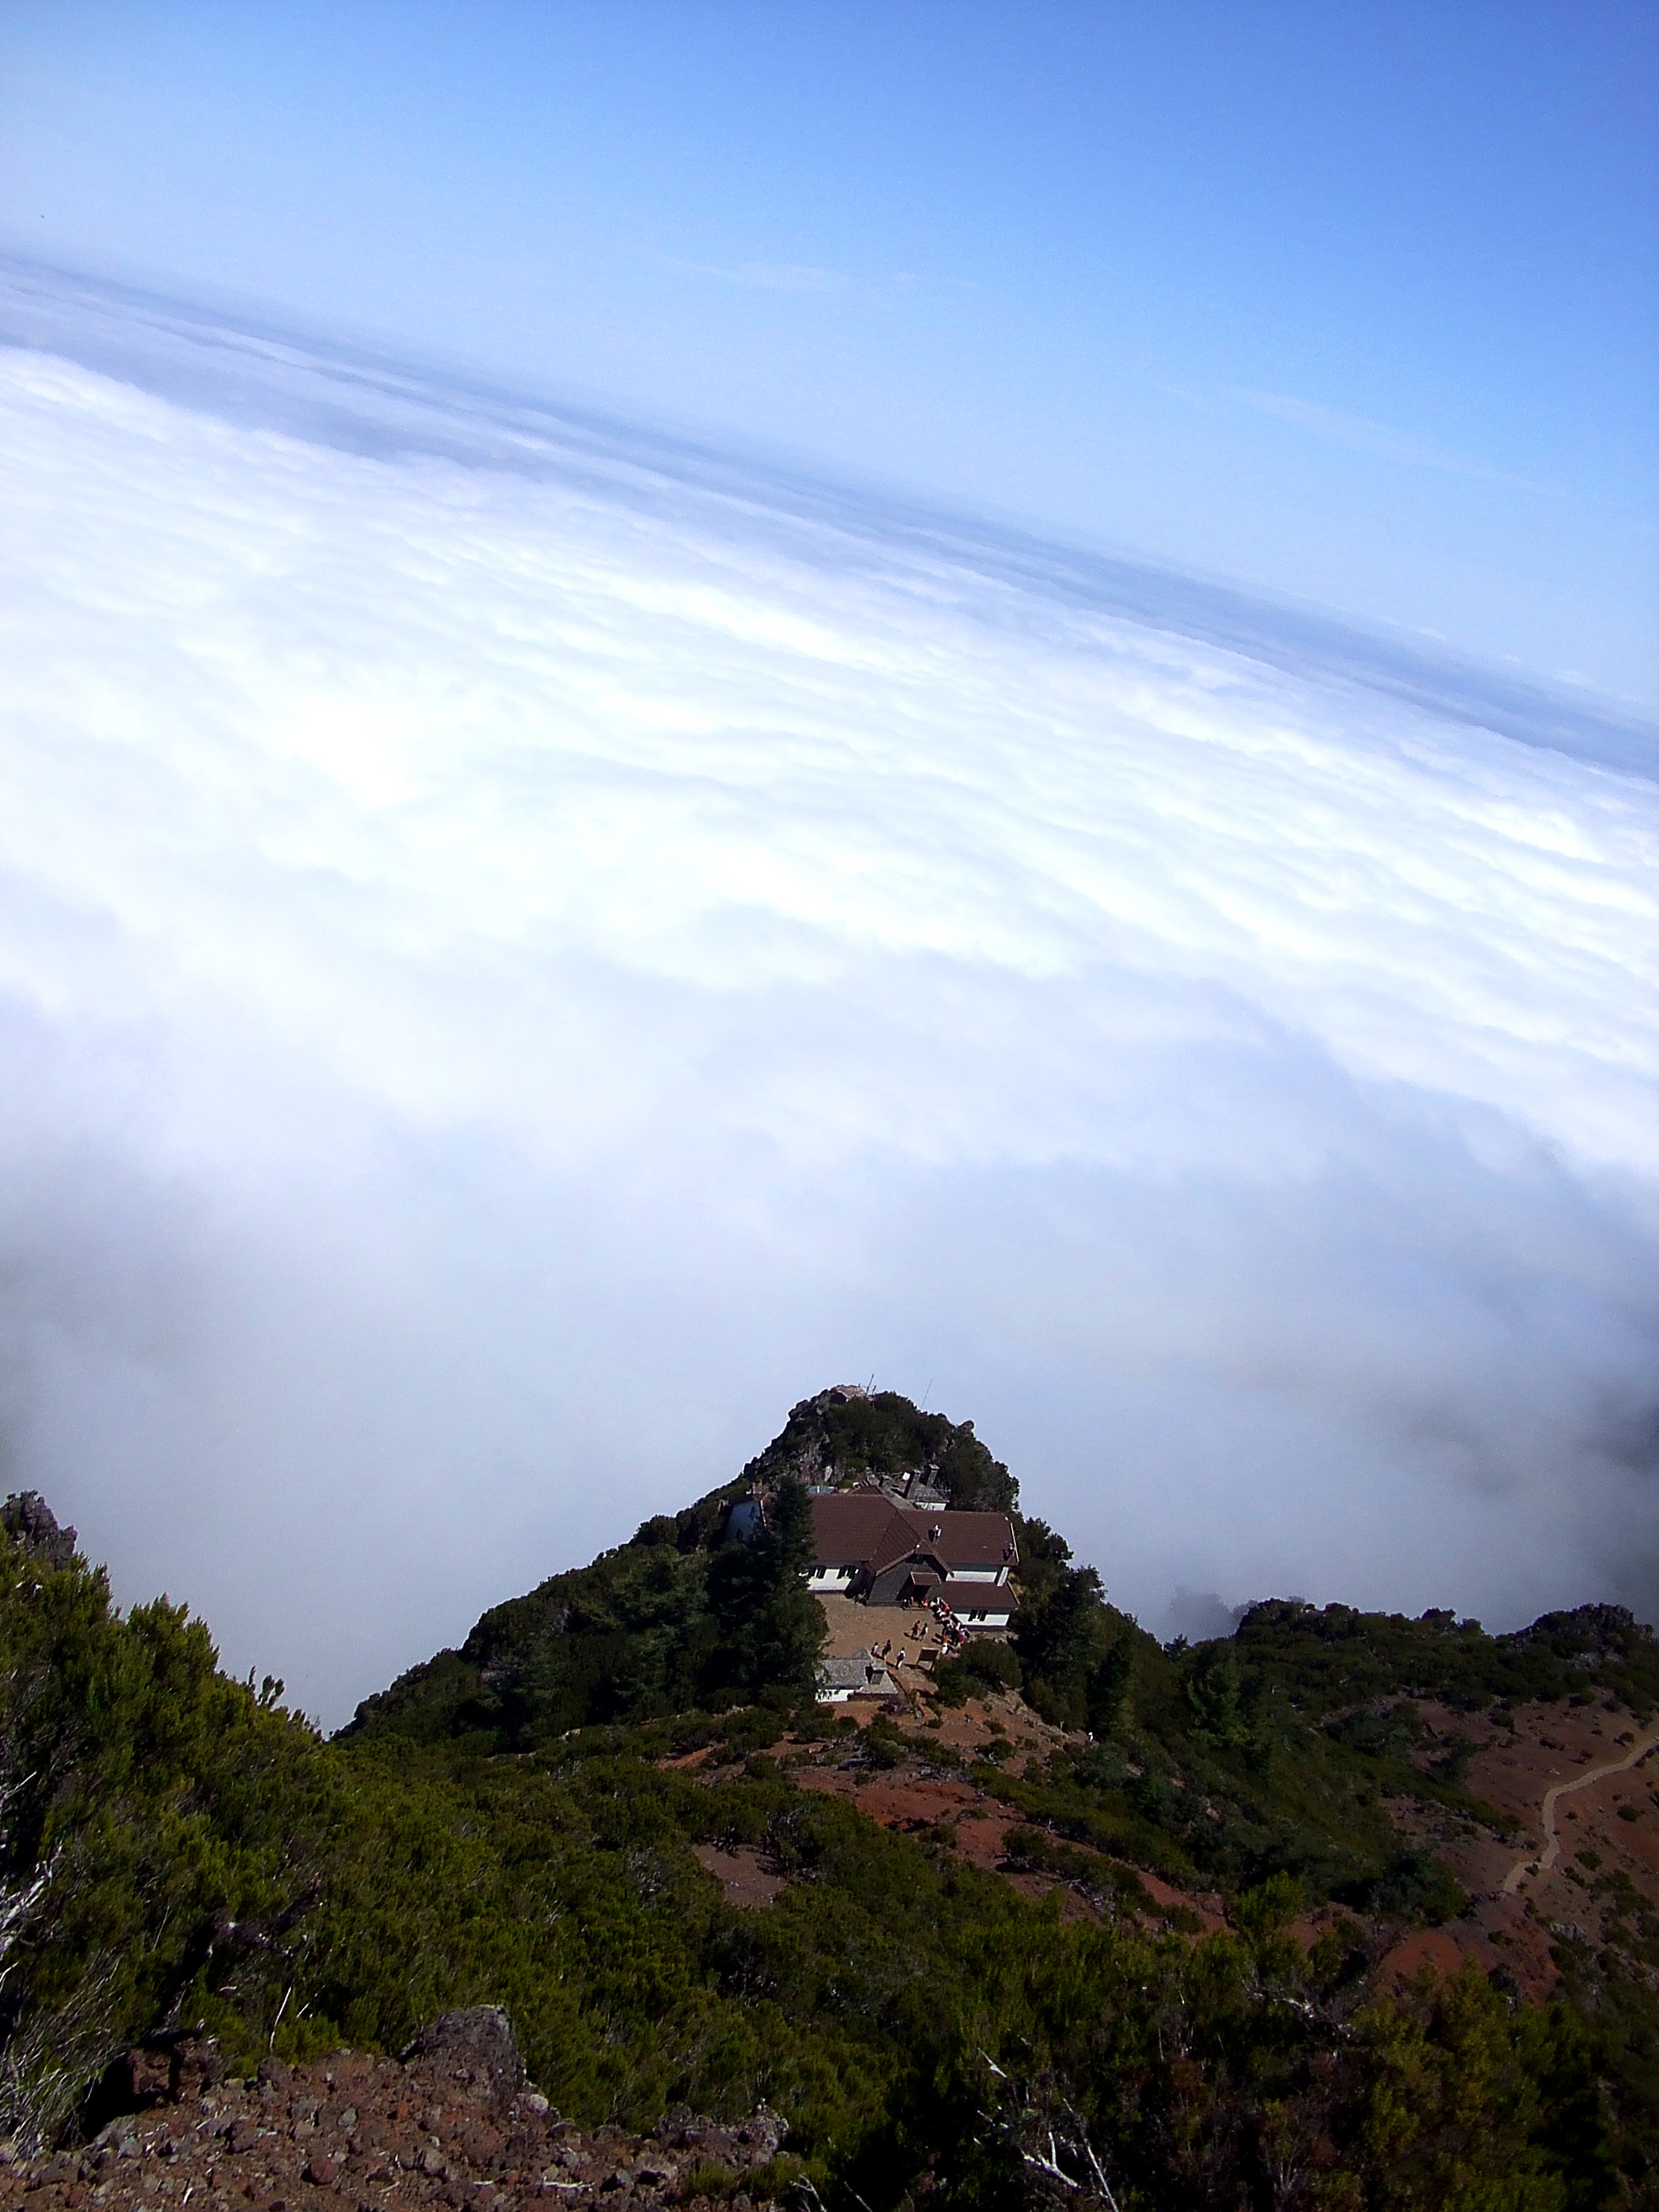 Lodge in the mountain above clouds photo